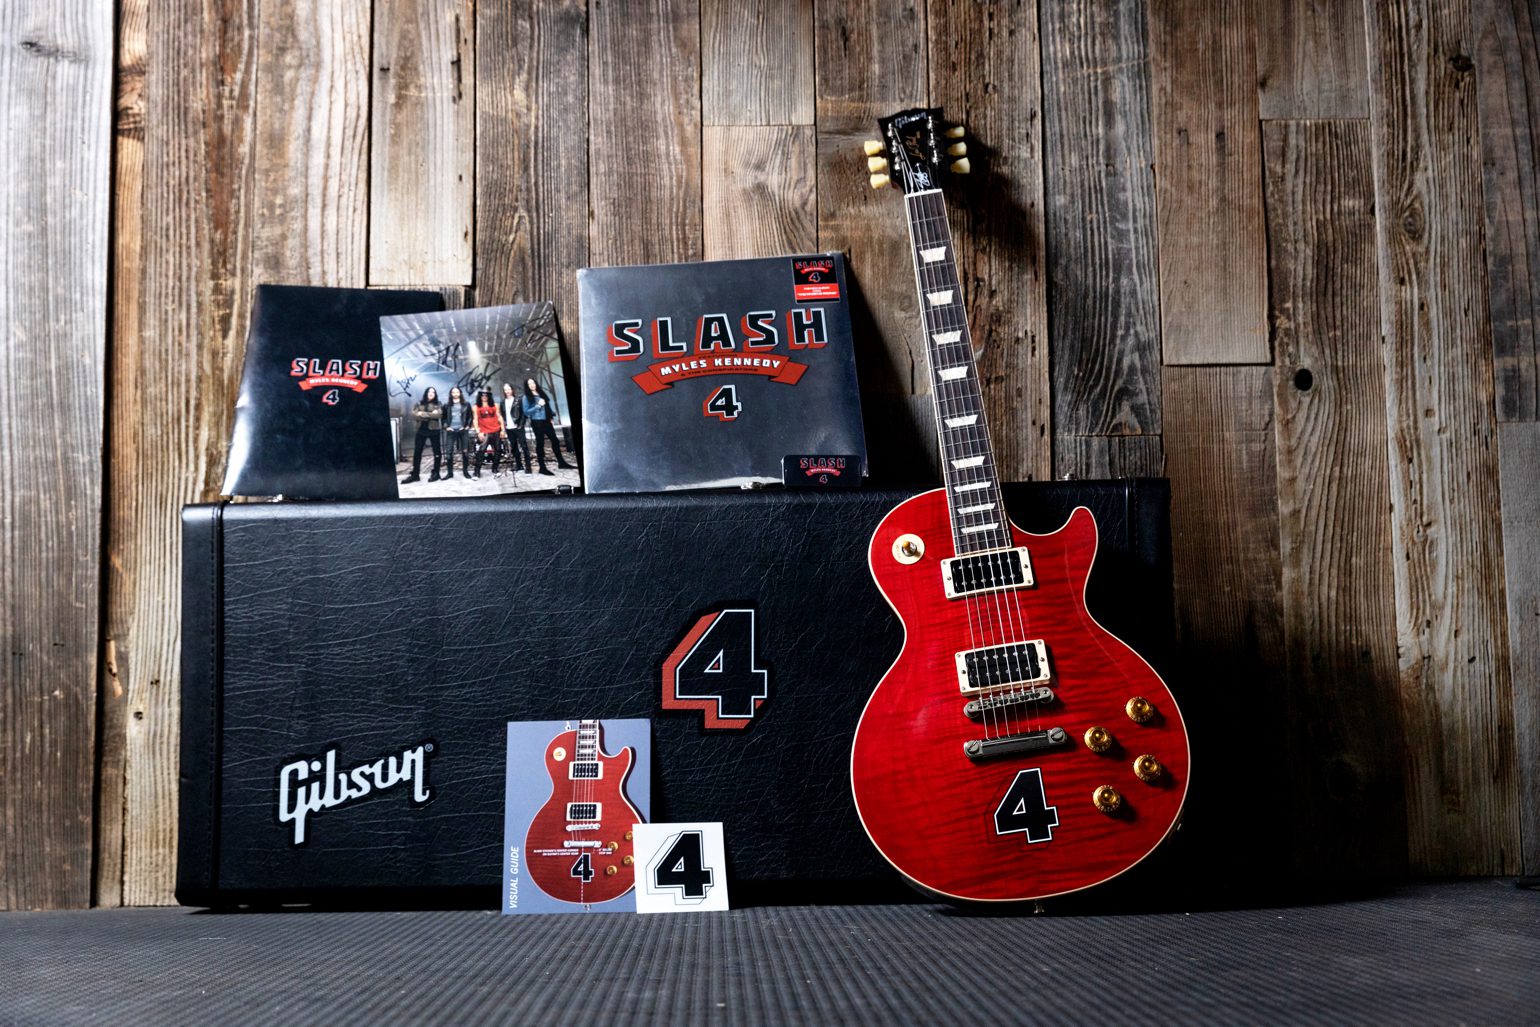 Gibson-Slash-Les-Paul-Standard-Limited-4-Album-Edition-with-loads-of-albbum-goodies-and-case-candy.jpg